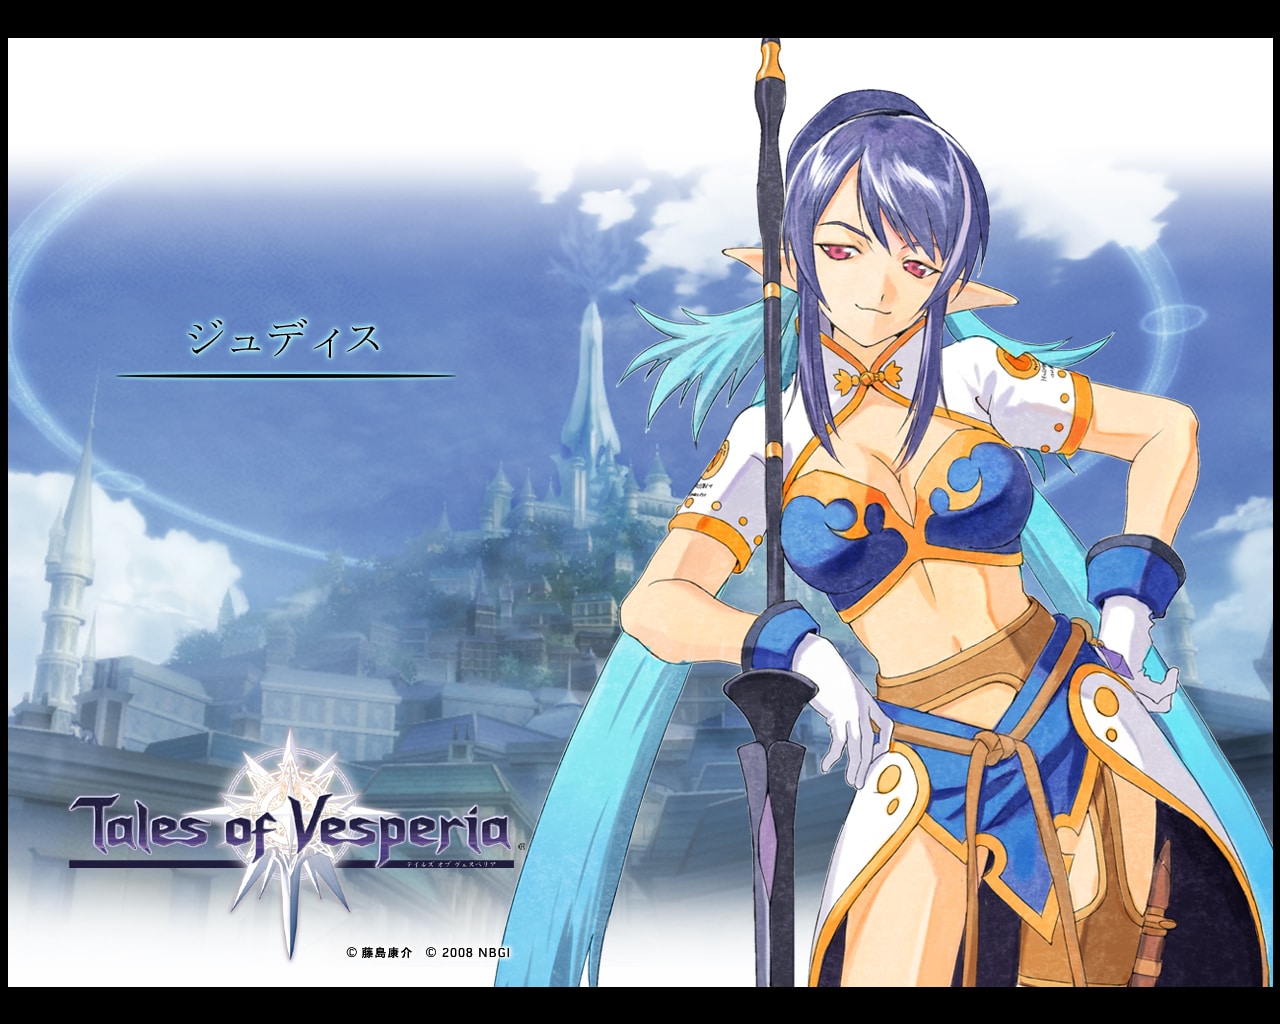 Tales of Vesperia 2 being considered by Namco Bandai - Video Games Blogger